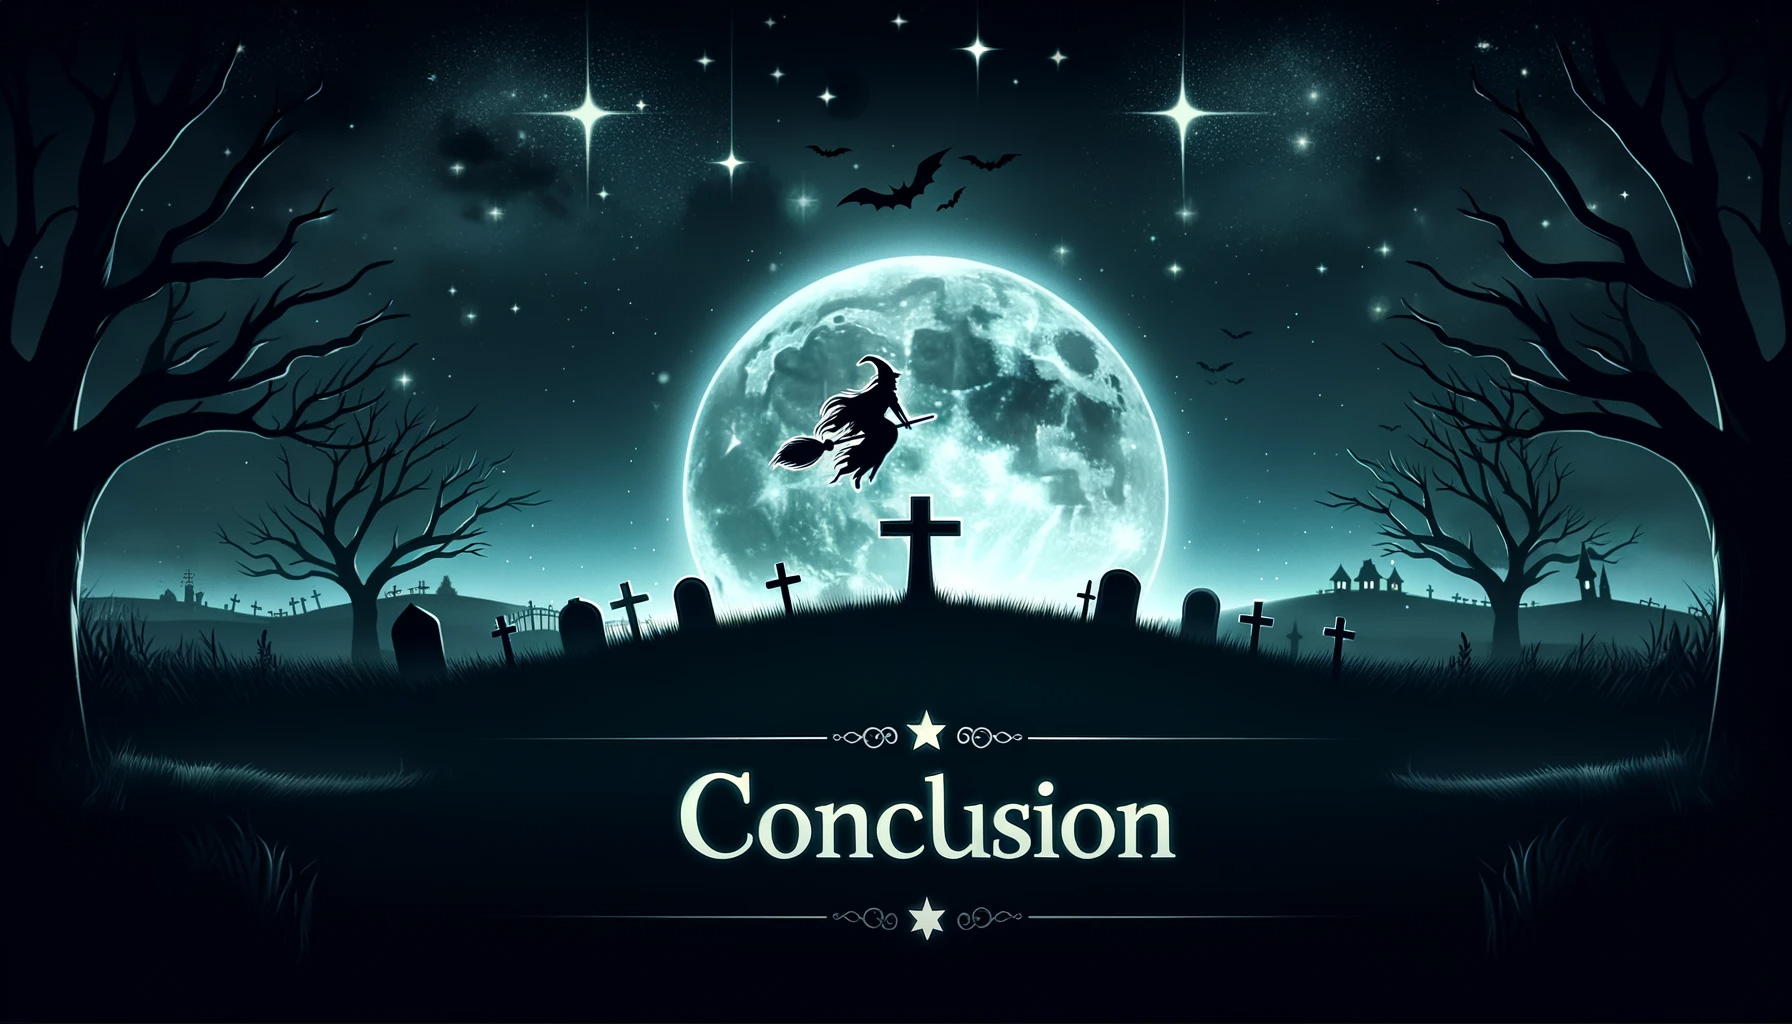 Halloween Marketing Campaign Tips and Idea Conclusion